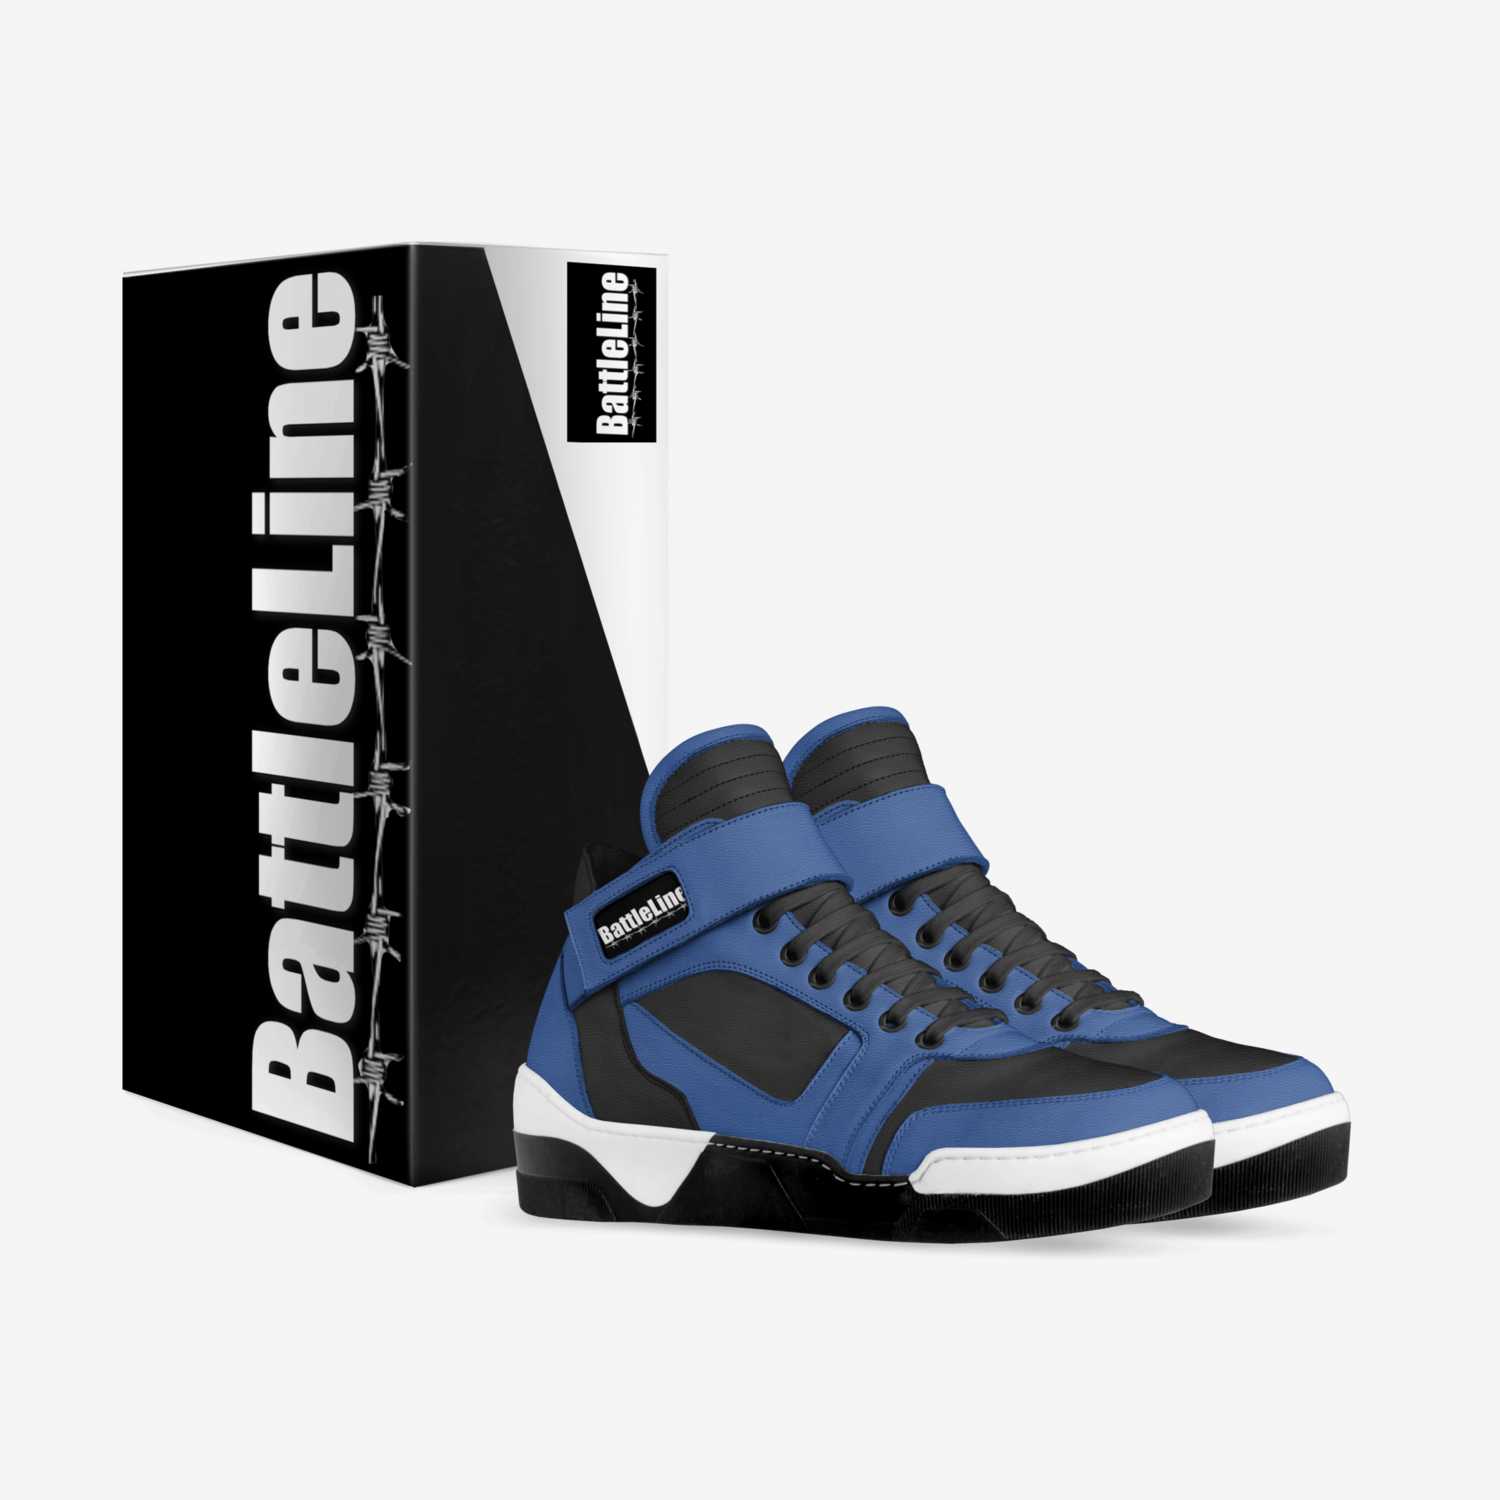 BattleLine custom made in Italy shoes by Vonnie Battle | Box view